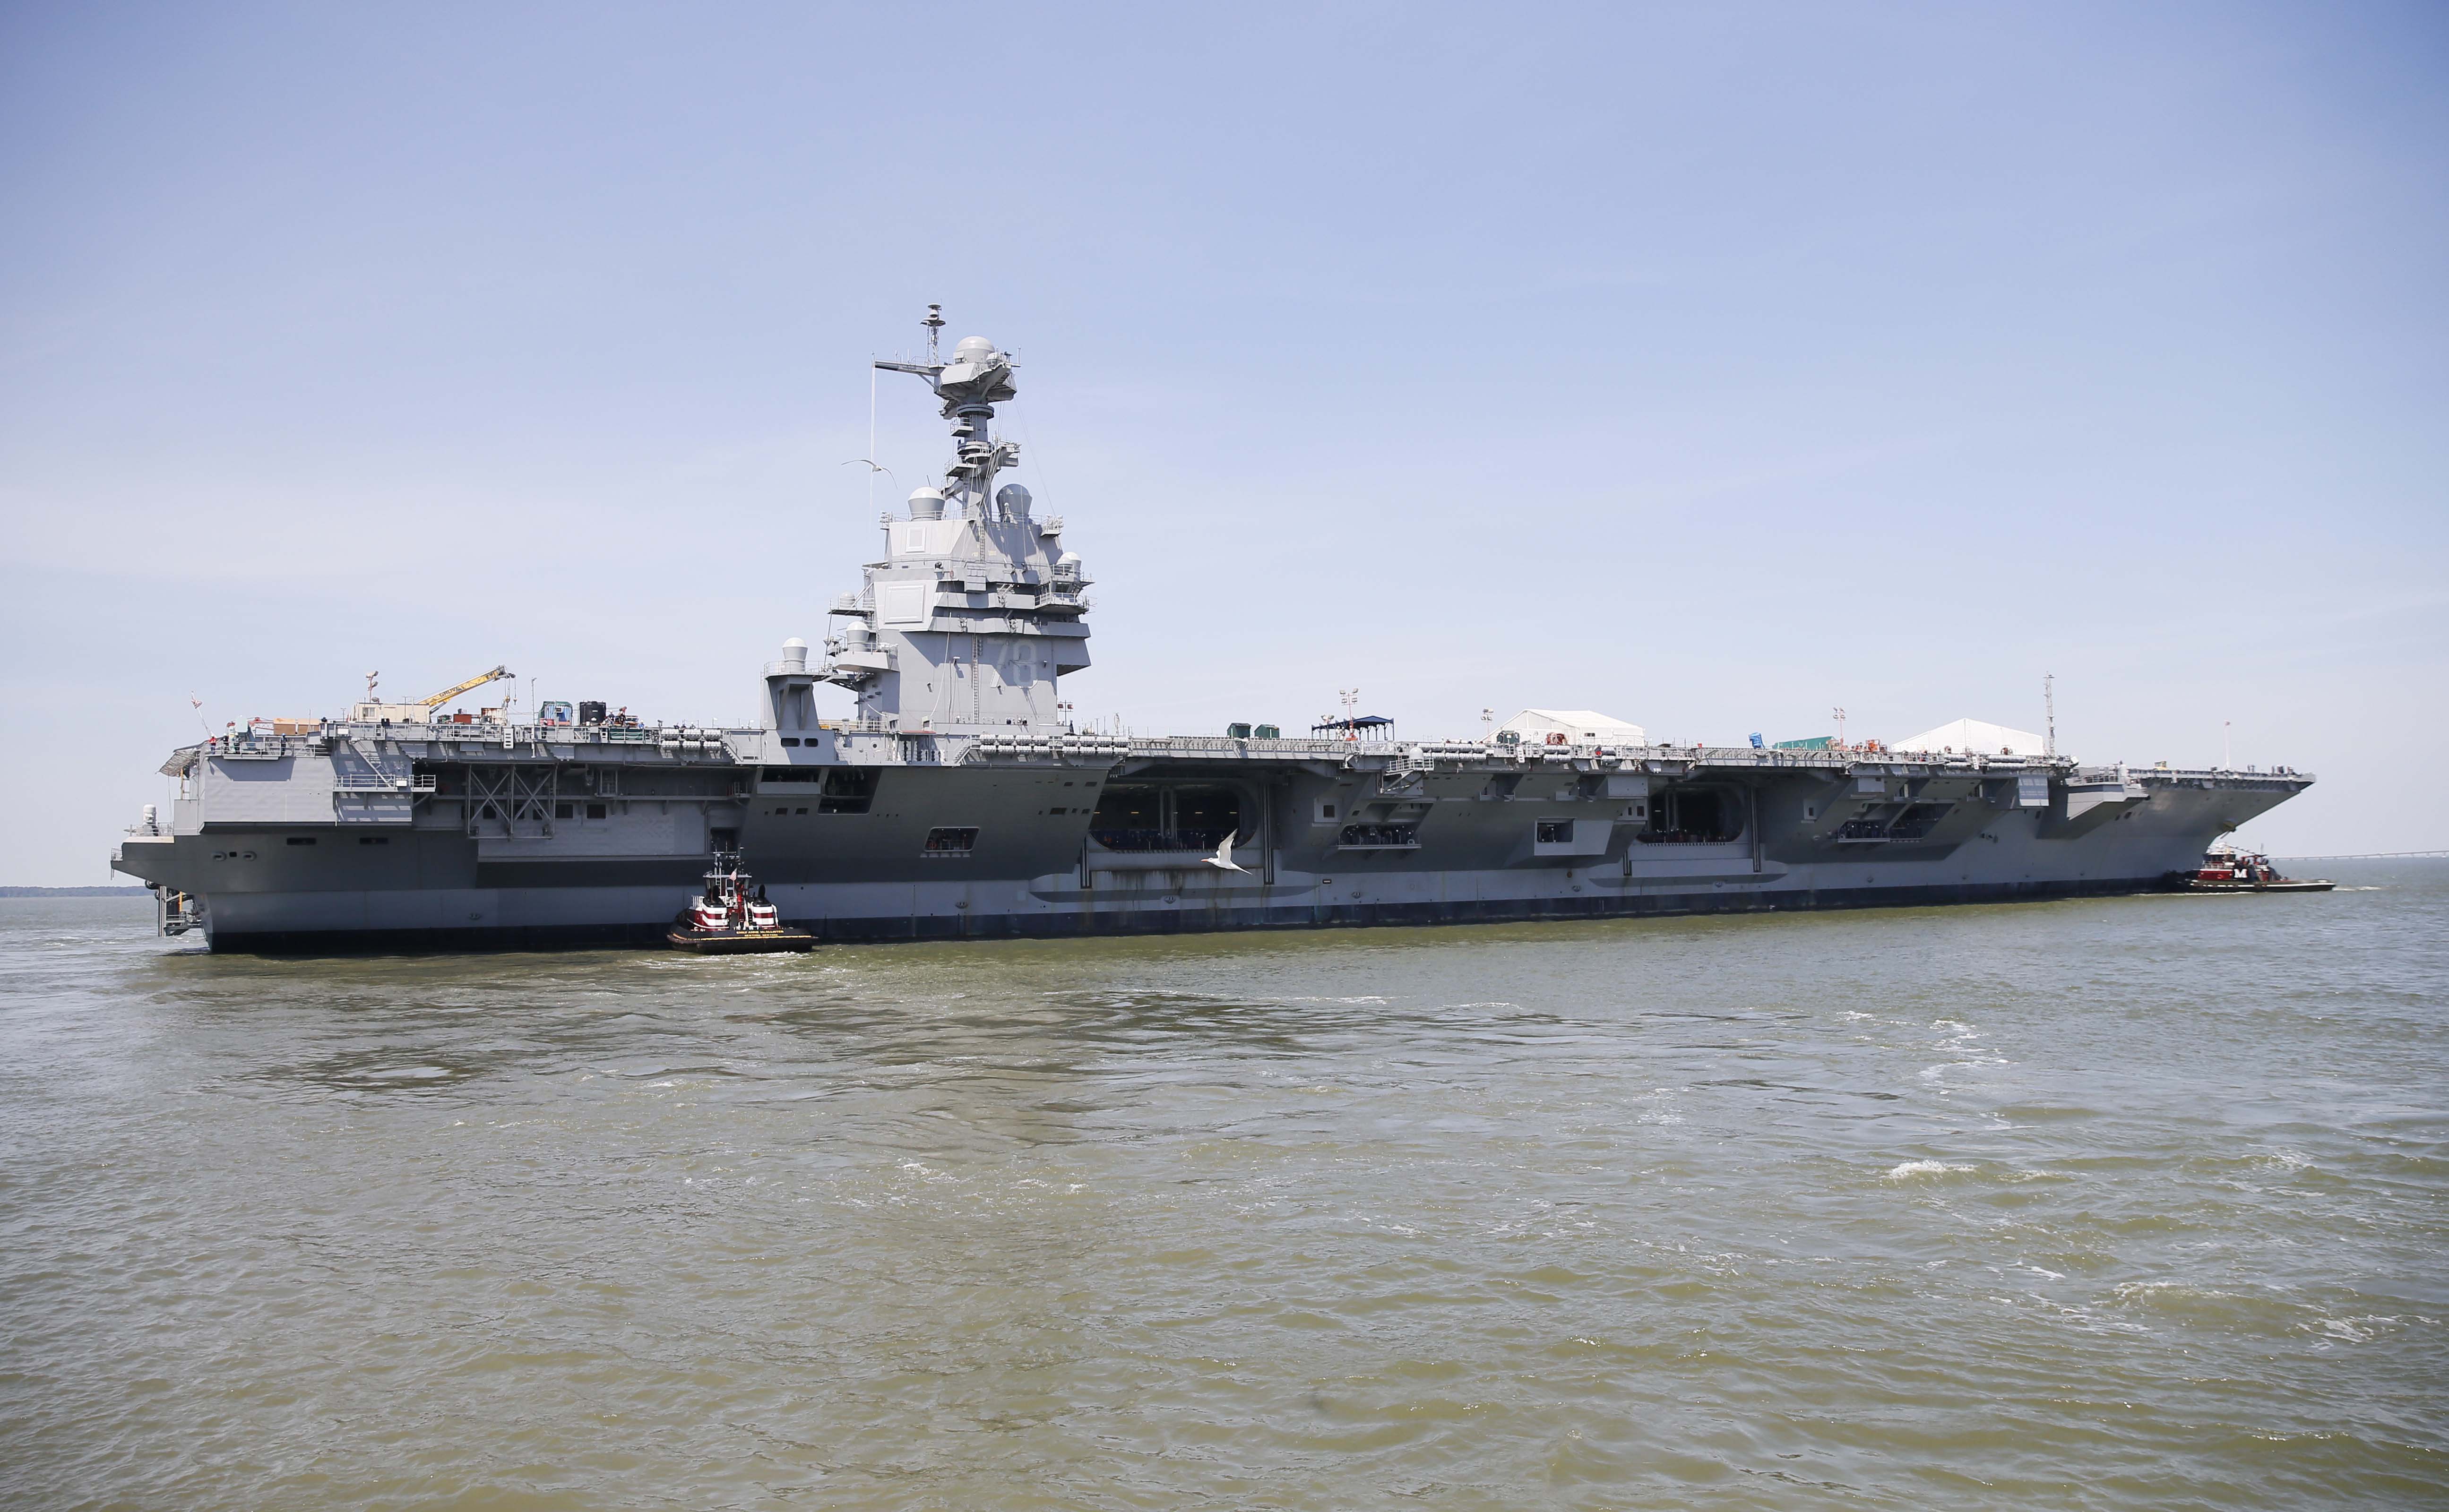 Tug boats maneuver Pre-Commissioning Unit Gerald R. Ford (CVN 78) into the James River during the ship's Turn Ship evolution on June 11, 2016. US Navy photo.